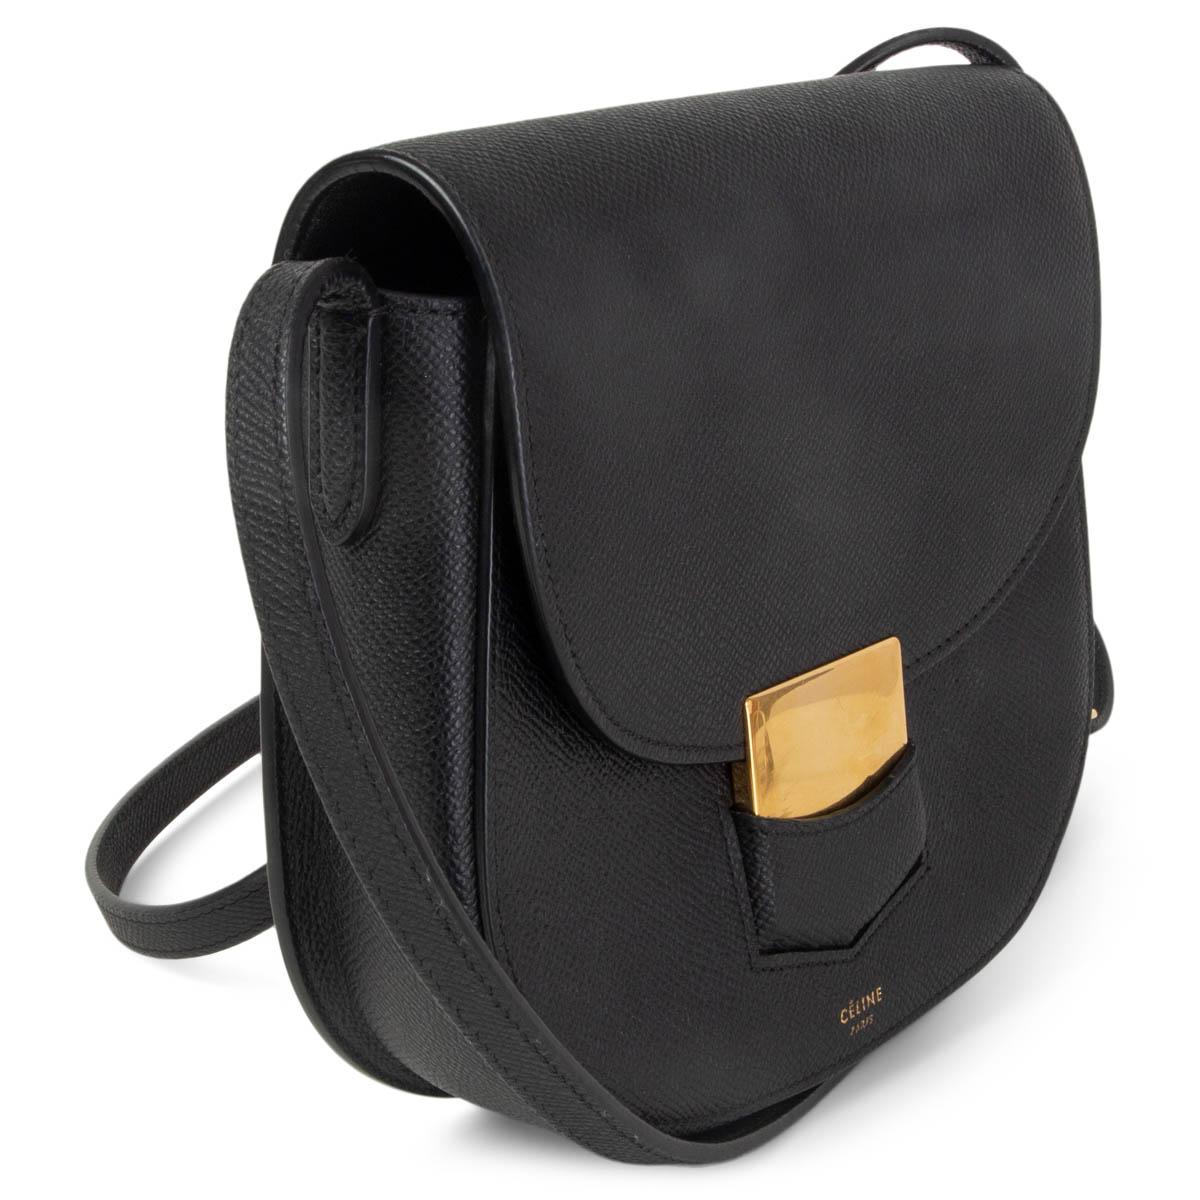 100% authentic Céline Small Trotteur shoulder bag in black grained leather with gold-tone metal closure and a patch pocket at the back. Lined in smooth lambskin with one open pocket against the back. Has been carried with some faint scratches on the